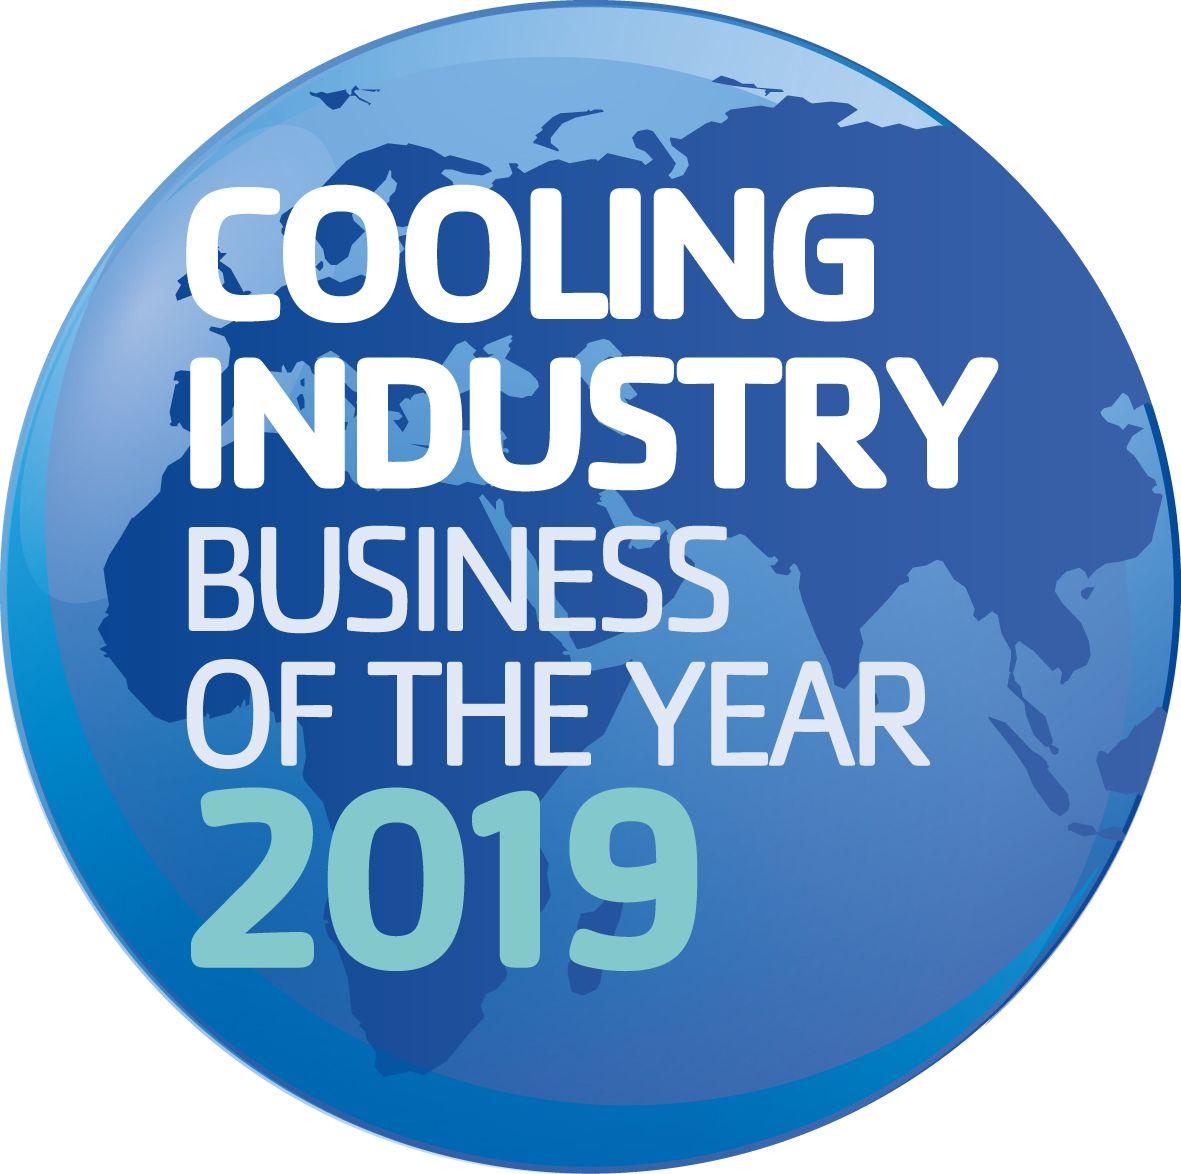 Industry with Blue Circle Logo - Are you the Cooling Business of the Year? | RAC Cooling Industry ...